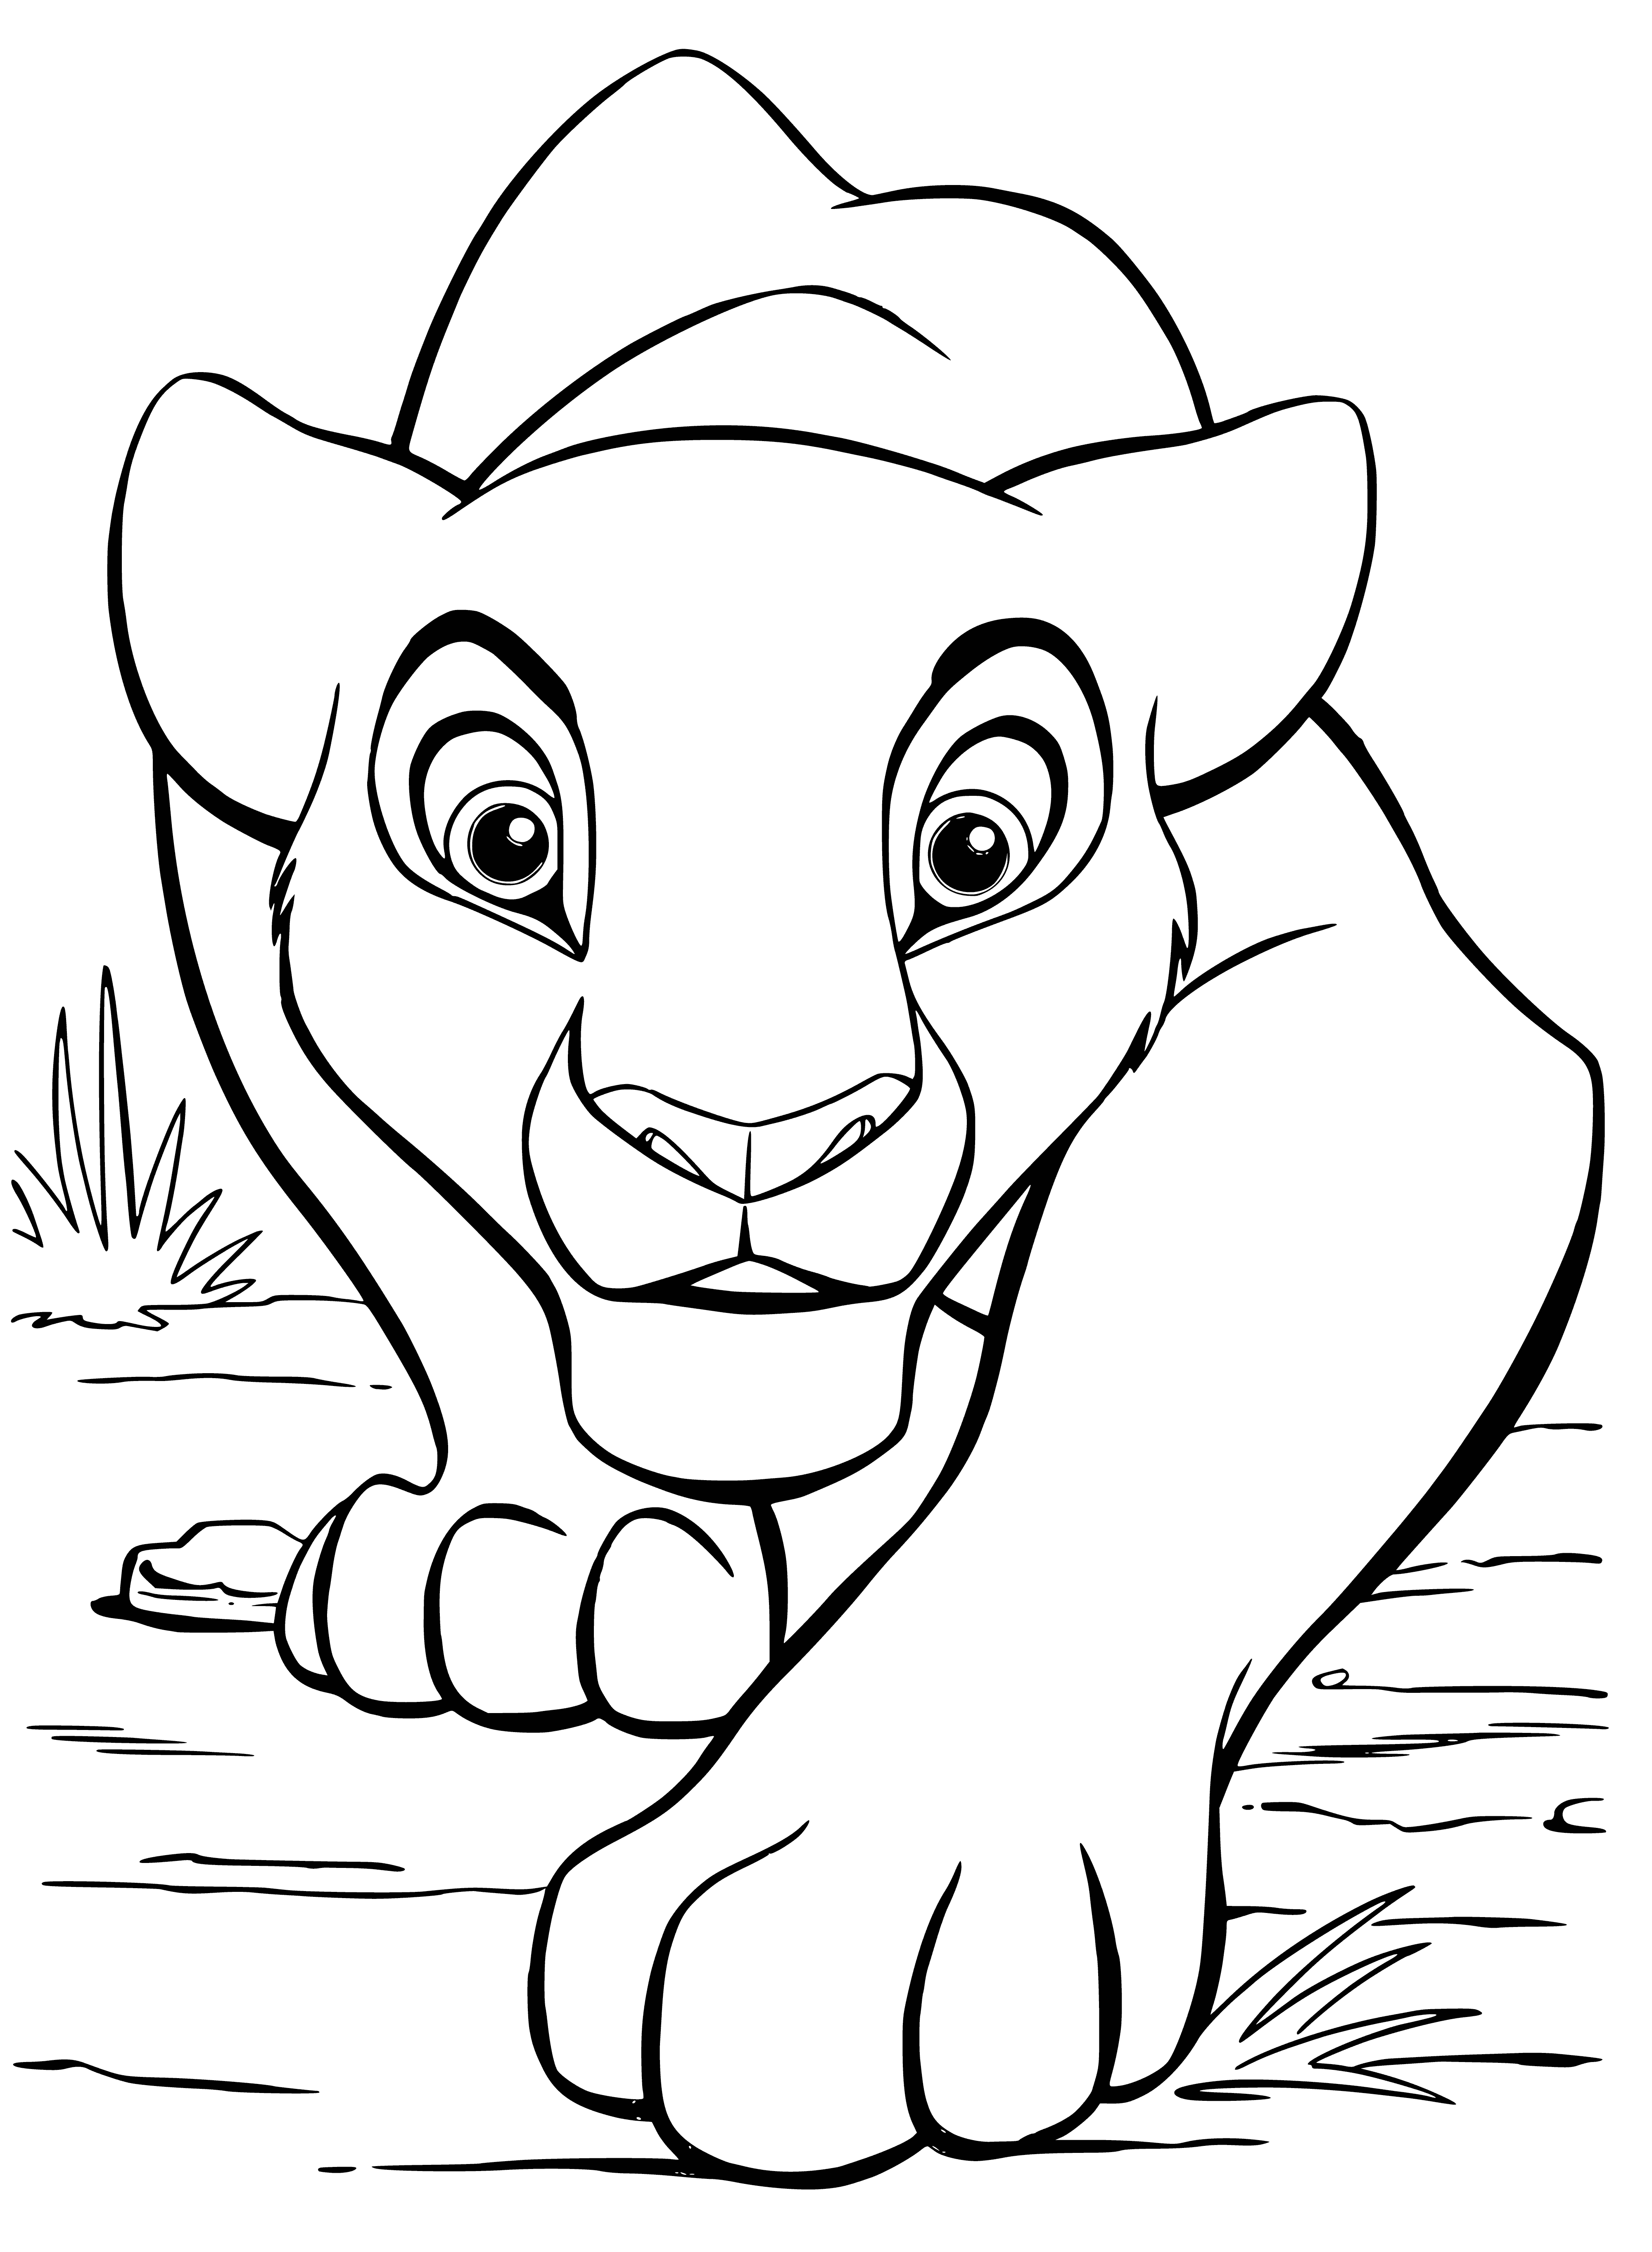 coloring page: A lioness stalks her prey, ready to pounce at a moment's notice: muscular body coiled and gaze fixed.